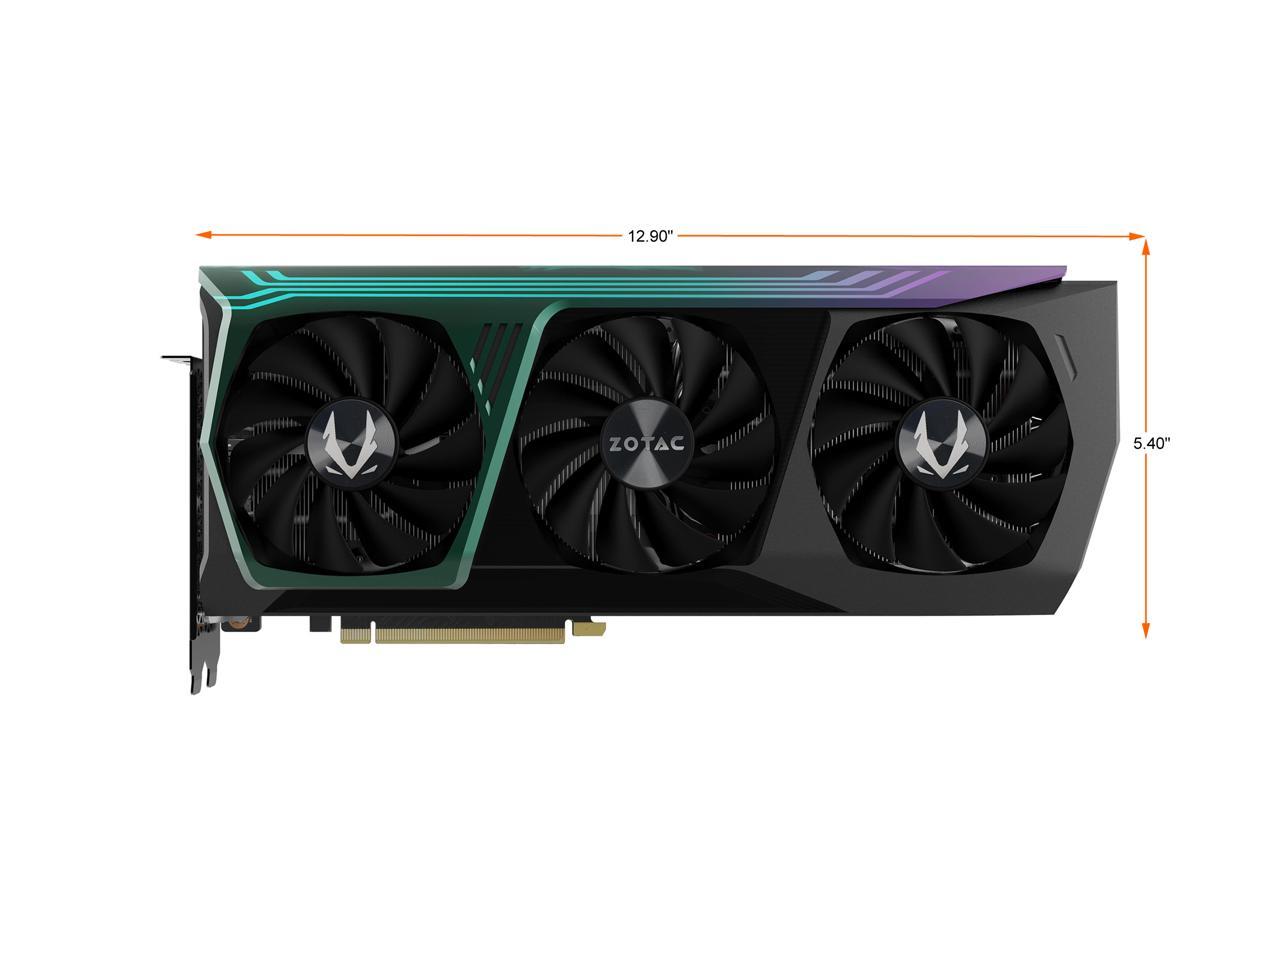 ZOTAC GAMING GeForce RTX 3090 AMP Core Holo 24GB GDDR6X 384-bit 19.5 Gbps PCIE 4.0 Gaming Graphics Card, HoloBlack, IceStorm 2.0 Advanced Cooling, SPECTRA 2.0 RGB Lighting, ZT-A30900C-10P